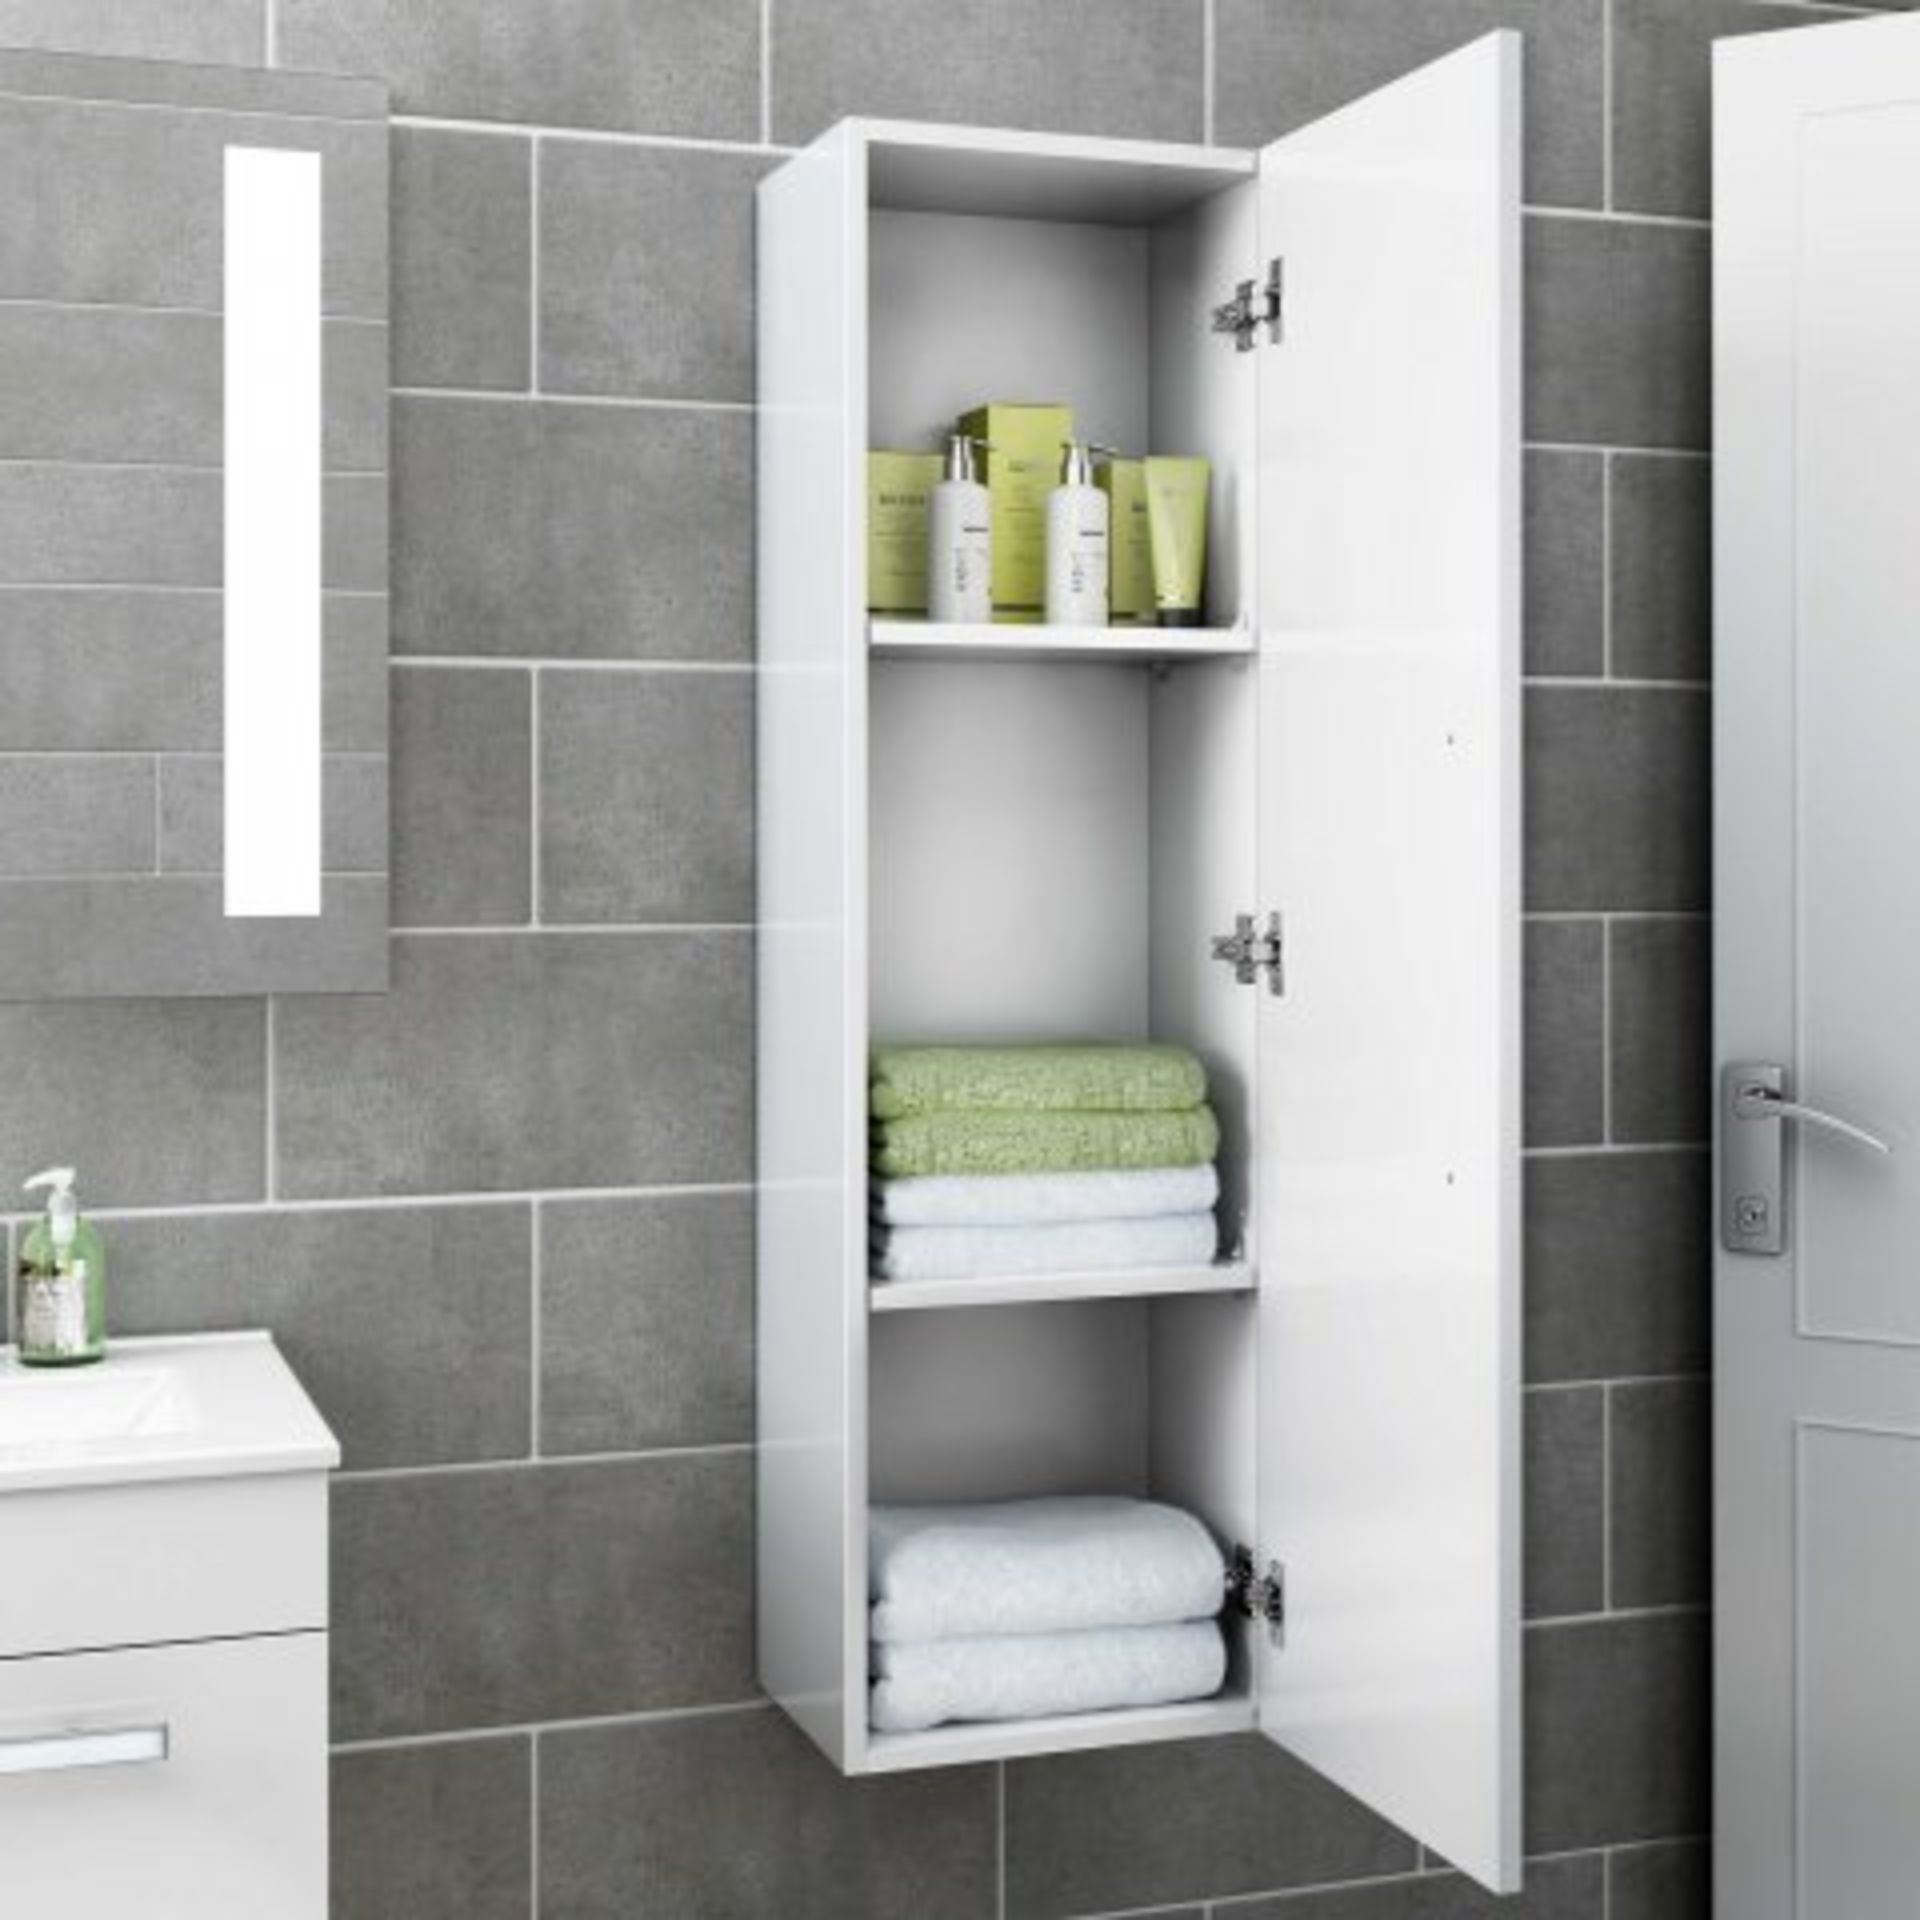 (A26) 1200mm Avon Gloss White Tall Storage Cabinet - Wall Hung. RRP £249.99. Contemporary Look - Image 3 of 5